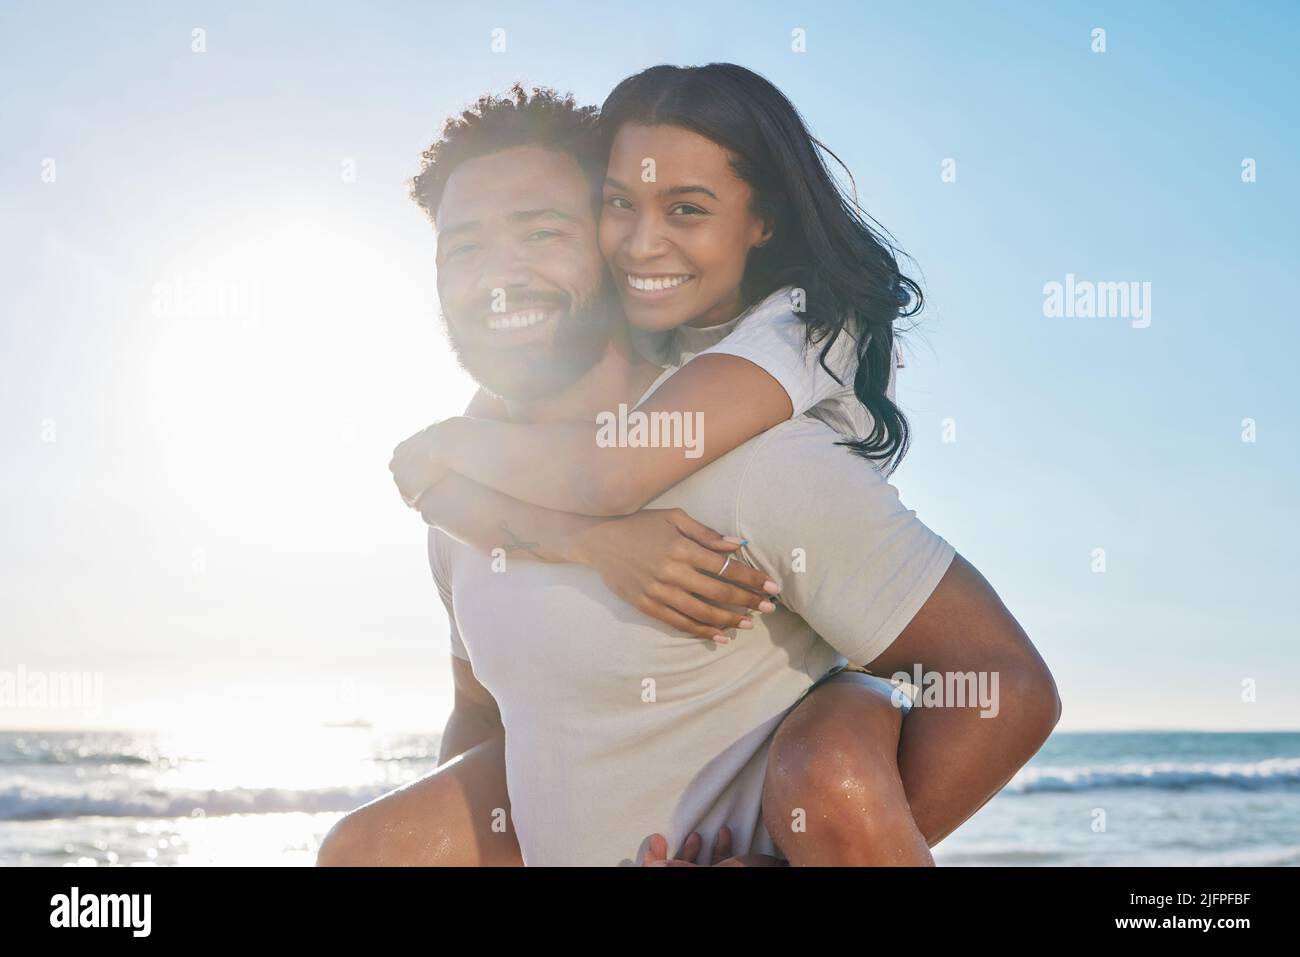 Bonding on the beach. Cropped portrait of a handsome young man piggybacking his wife on the beach. Stock Photo